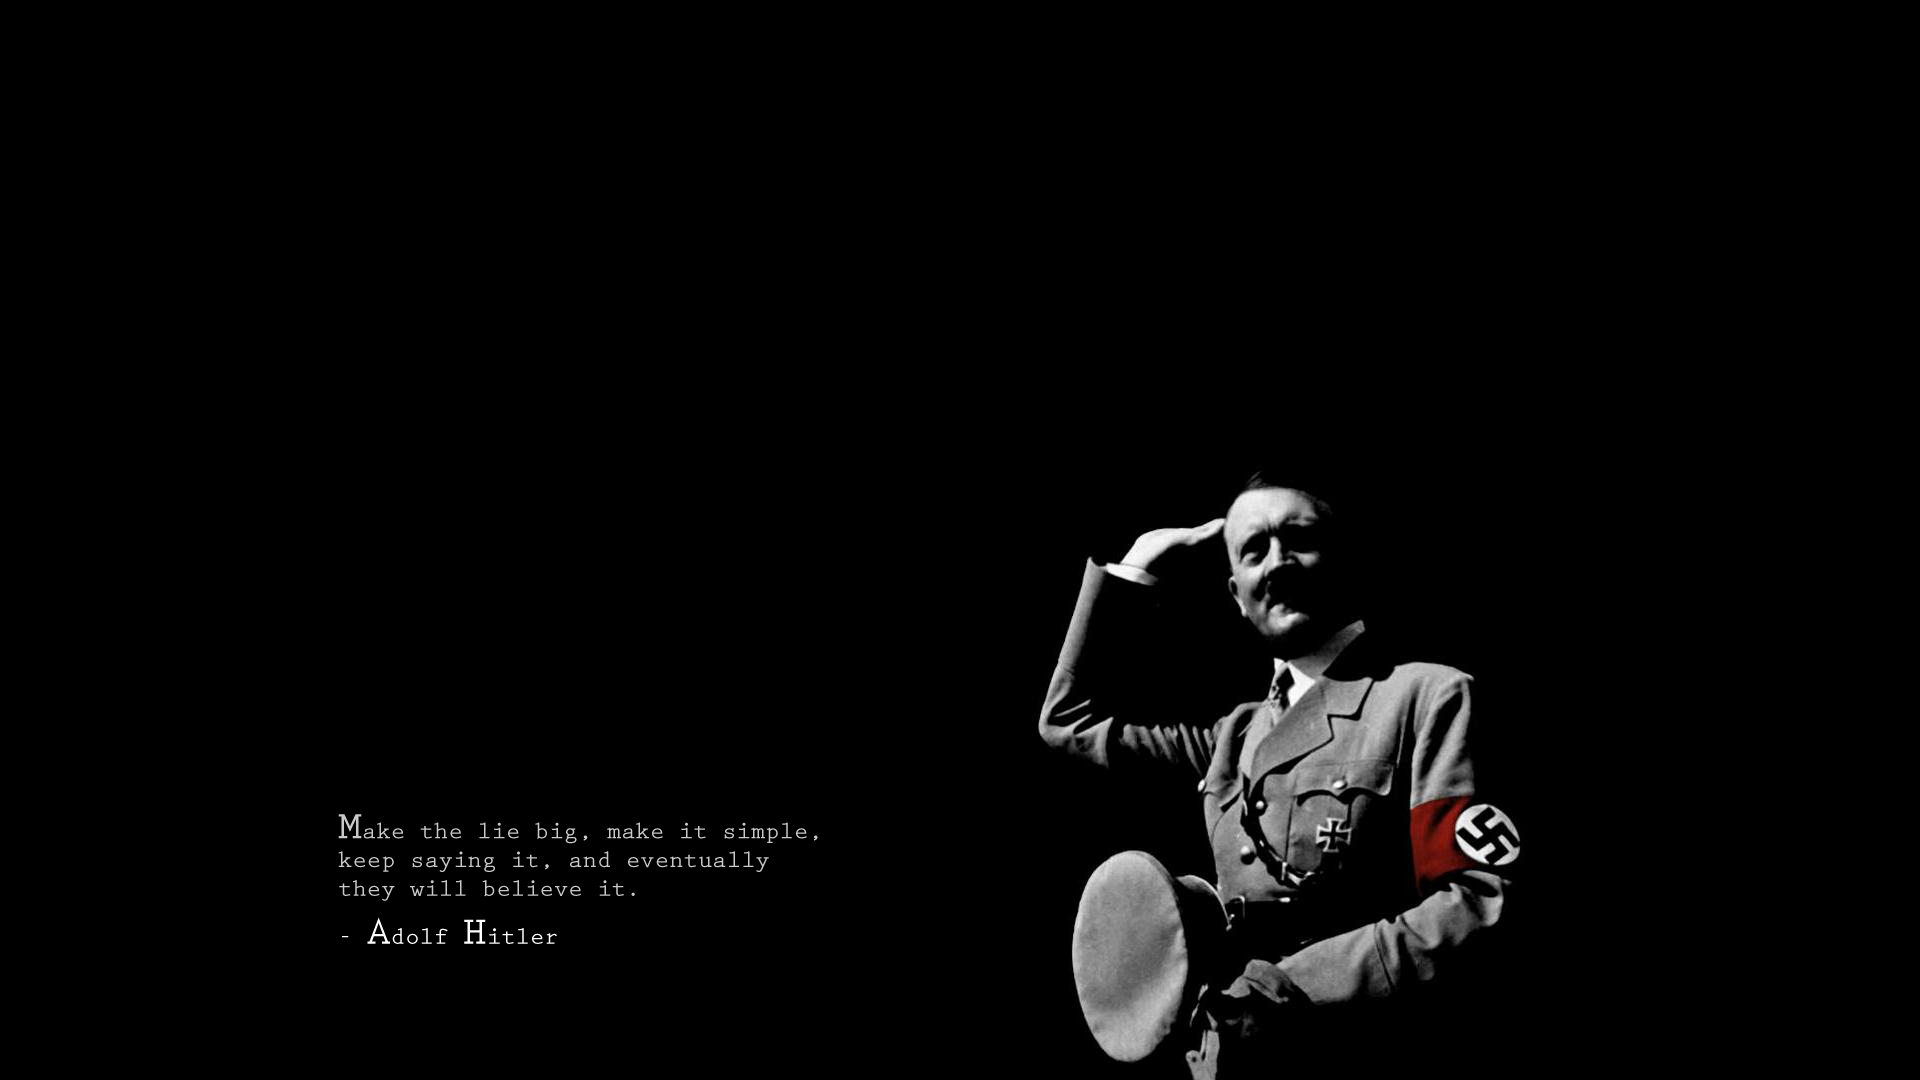 Wallpaper Quote by Hitler